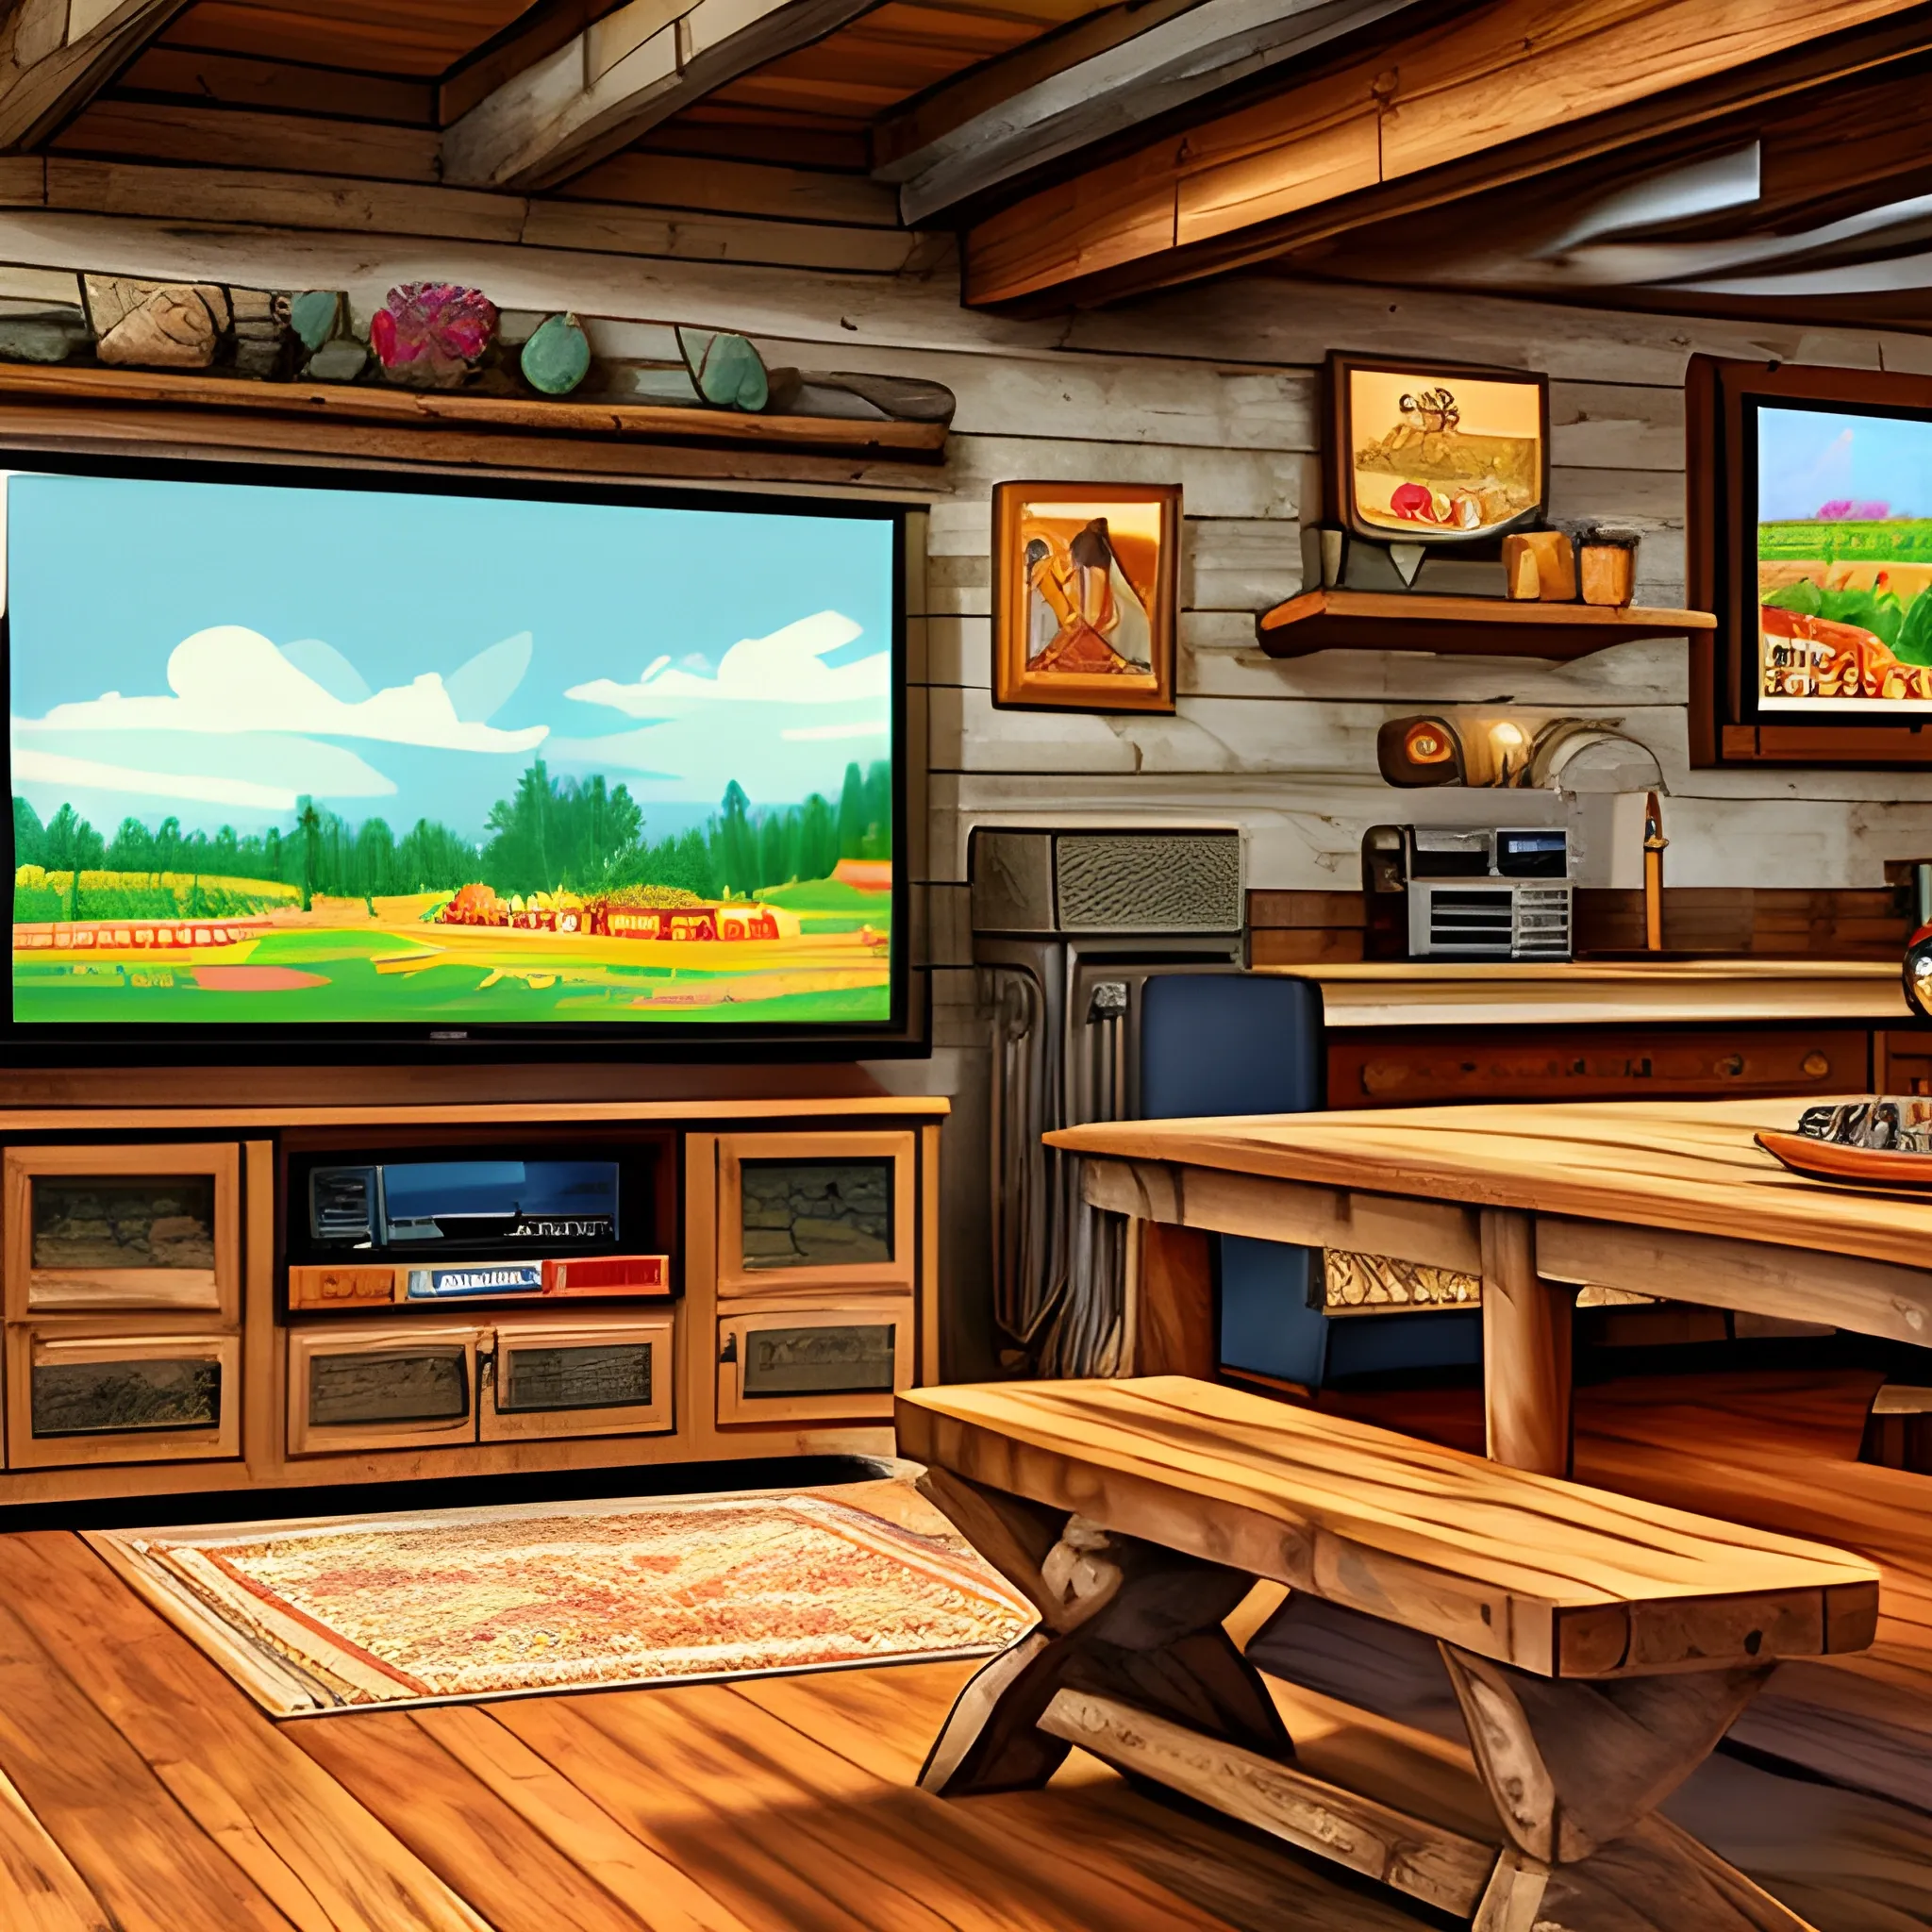 Rustic Living Room With Wooden Table